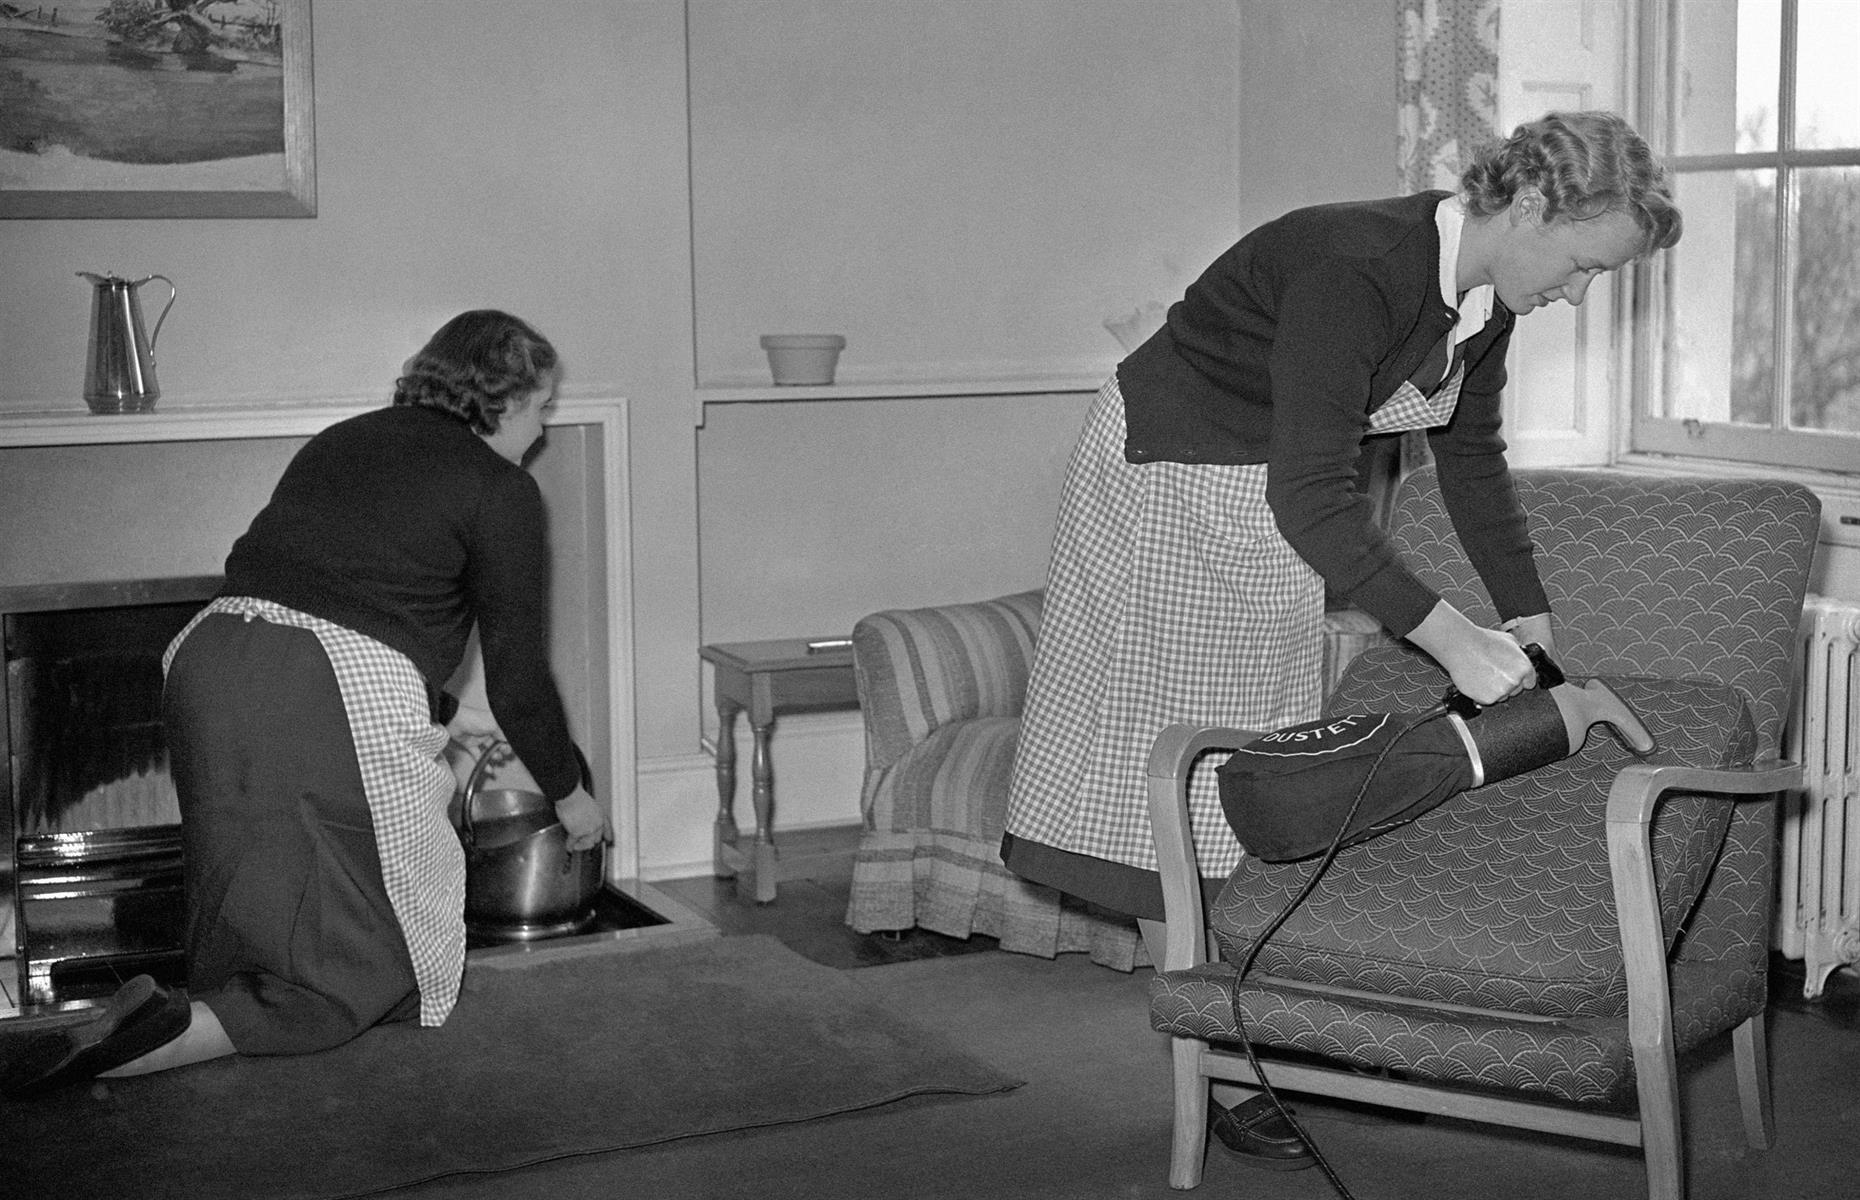 1947: Cleaning up